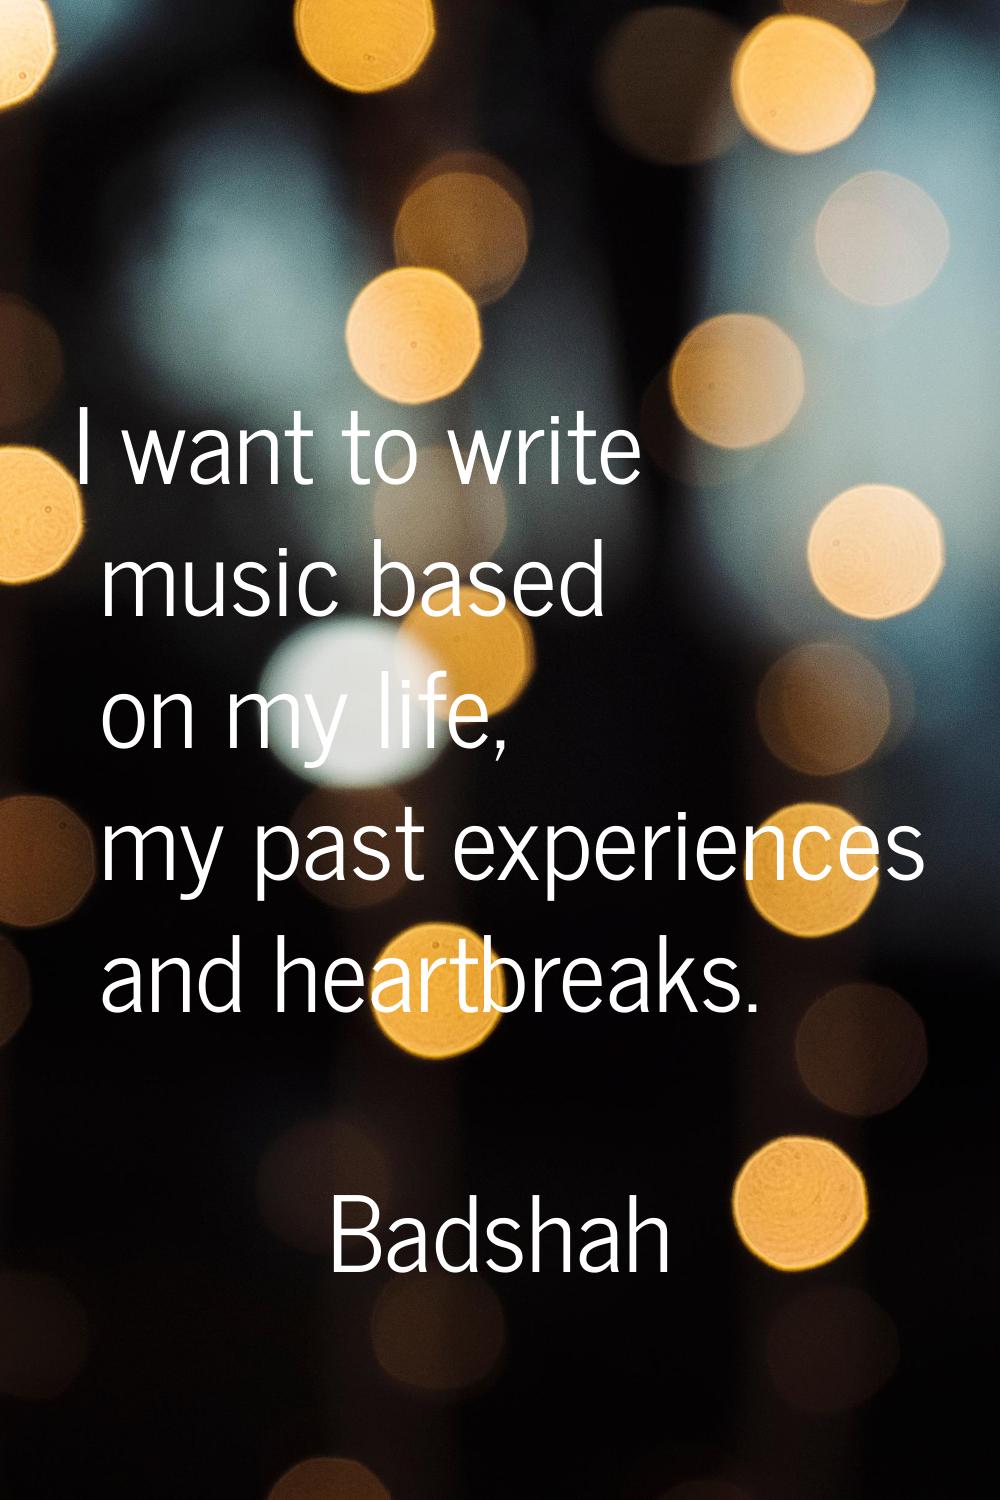 I want to write music based on my life, my past experiences and heartbreaks.